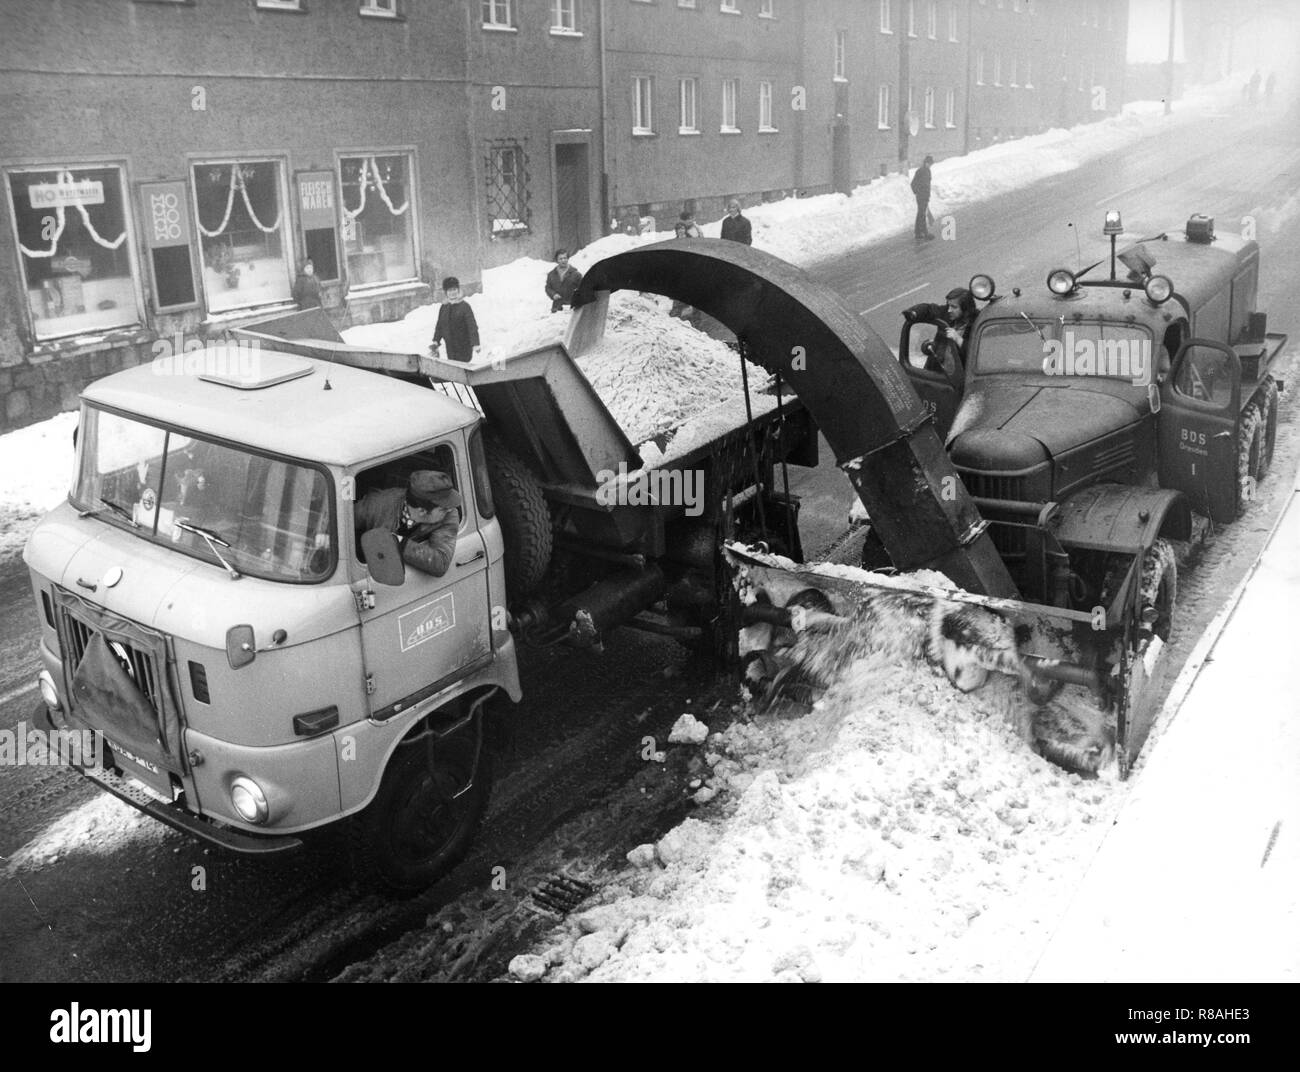 At the beginning of January 1978, employees from the street winter service in Altenberg rid the transit route to Prague of snow and ice. At the same time, a Soviet snowblower loads the snow onto a W50. Photo: Ulrich Hassler     (c) dpa - Report     | usage worldwide Stock Photo